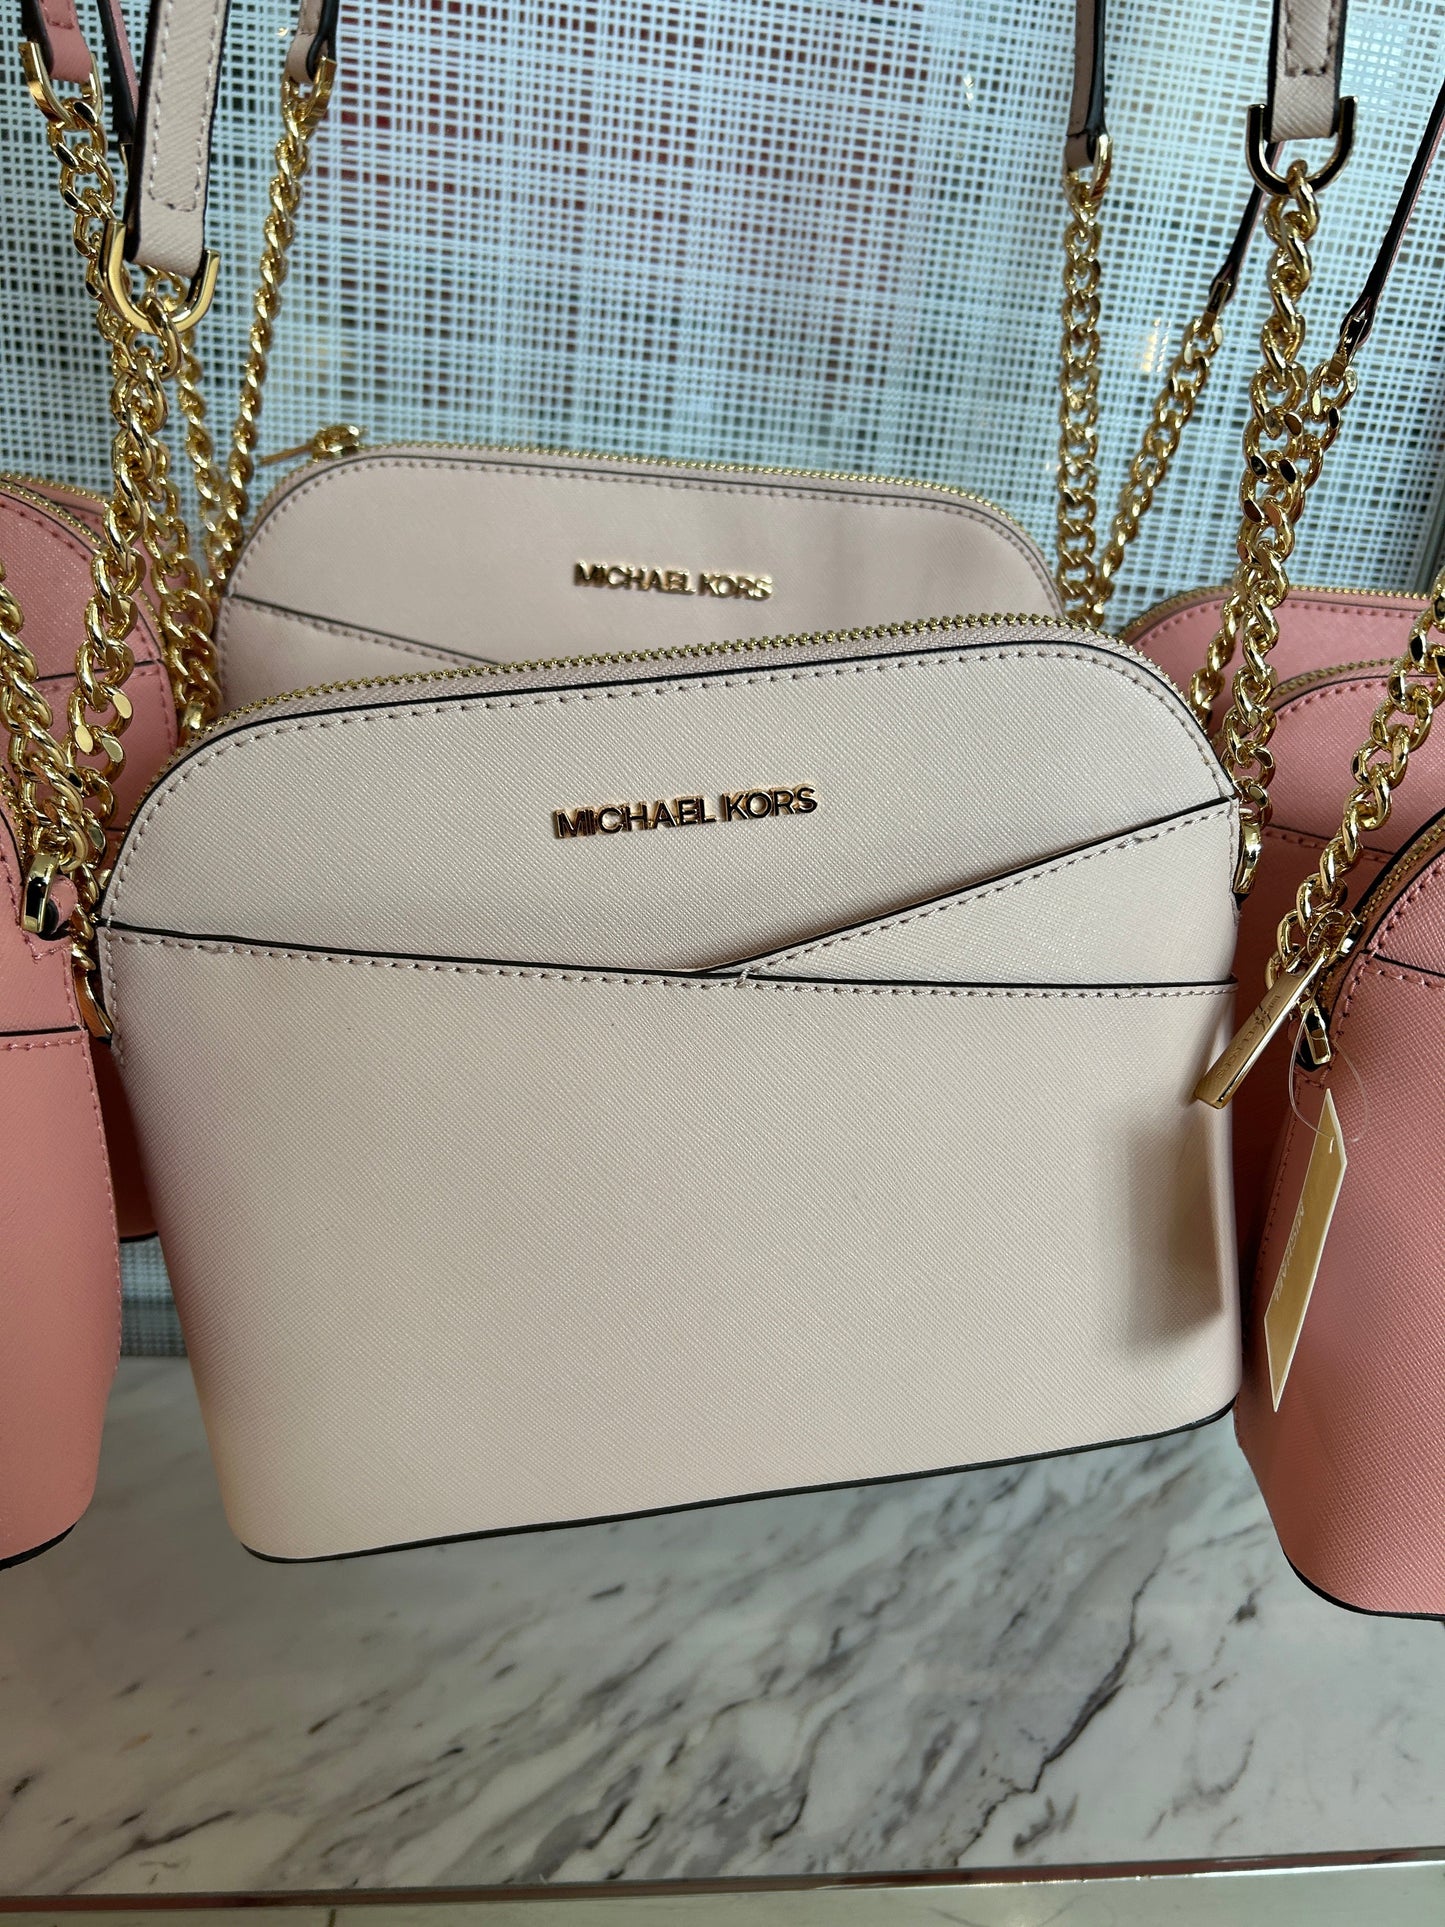 Load image into Gallery viewer, Michael Kors Dome Crossbody In Powder Blush (Pre-order)
